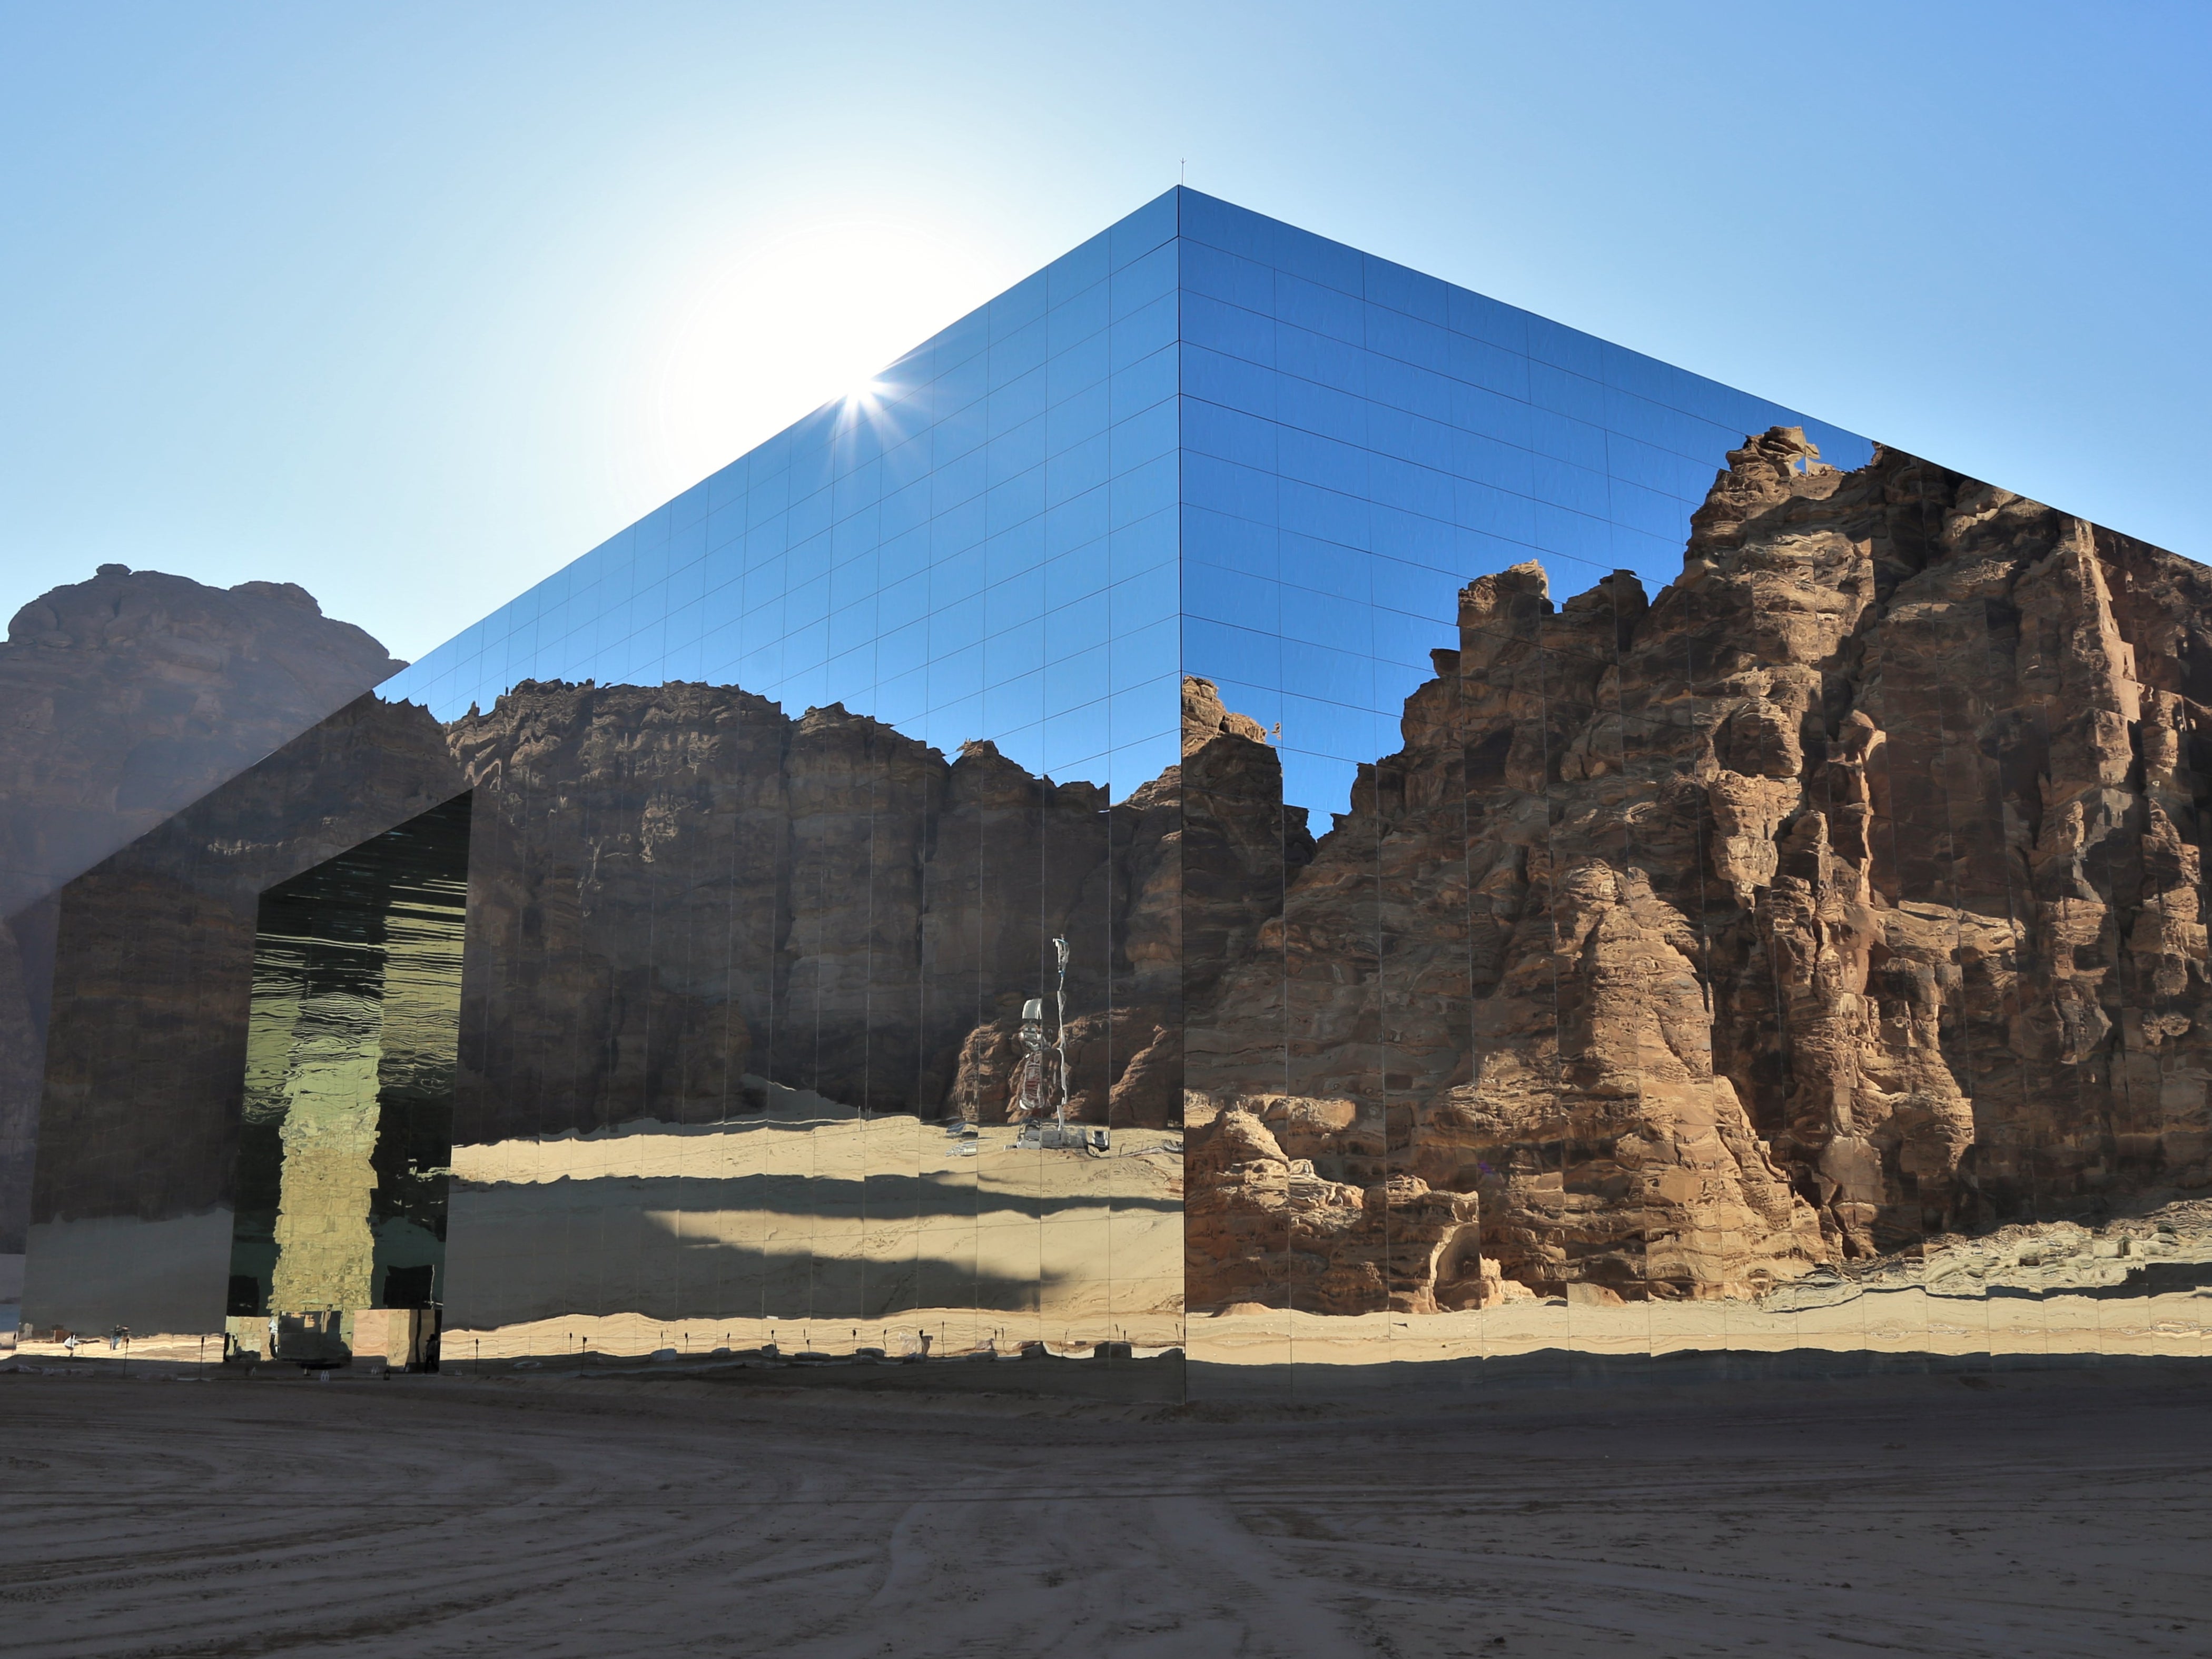 The mirrored Maraya concert hall is one of AlUla’s centrepiece venues